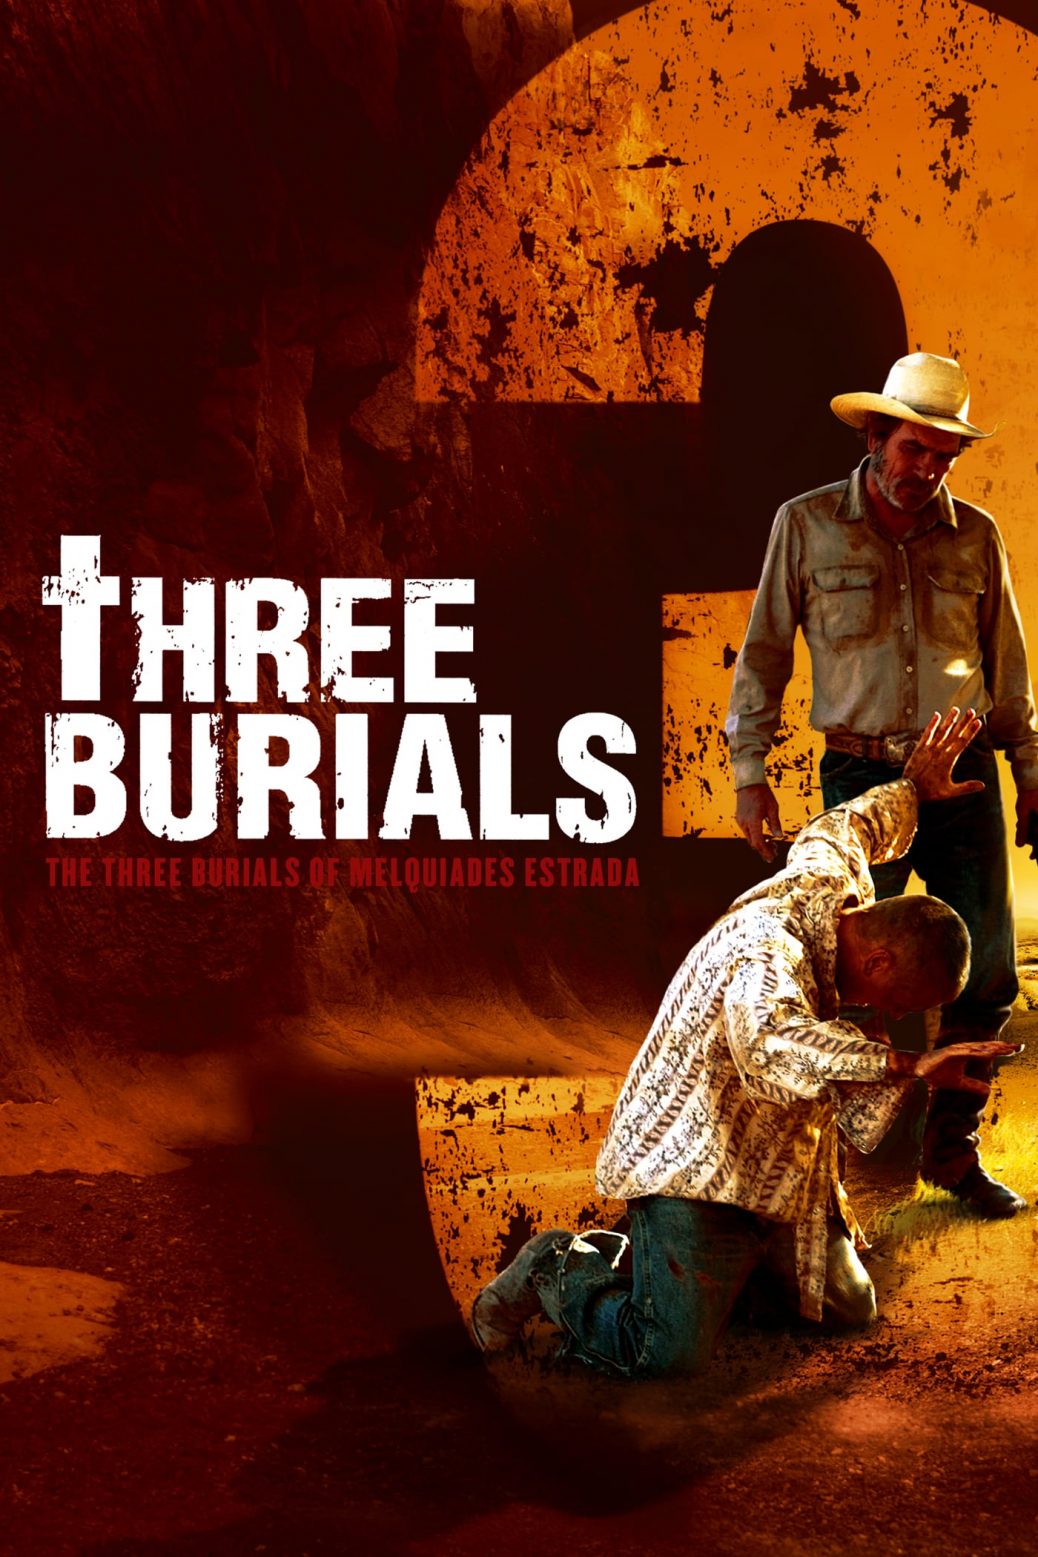 Poster for the movie "The Three Burials of Melquiades Estrada"